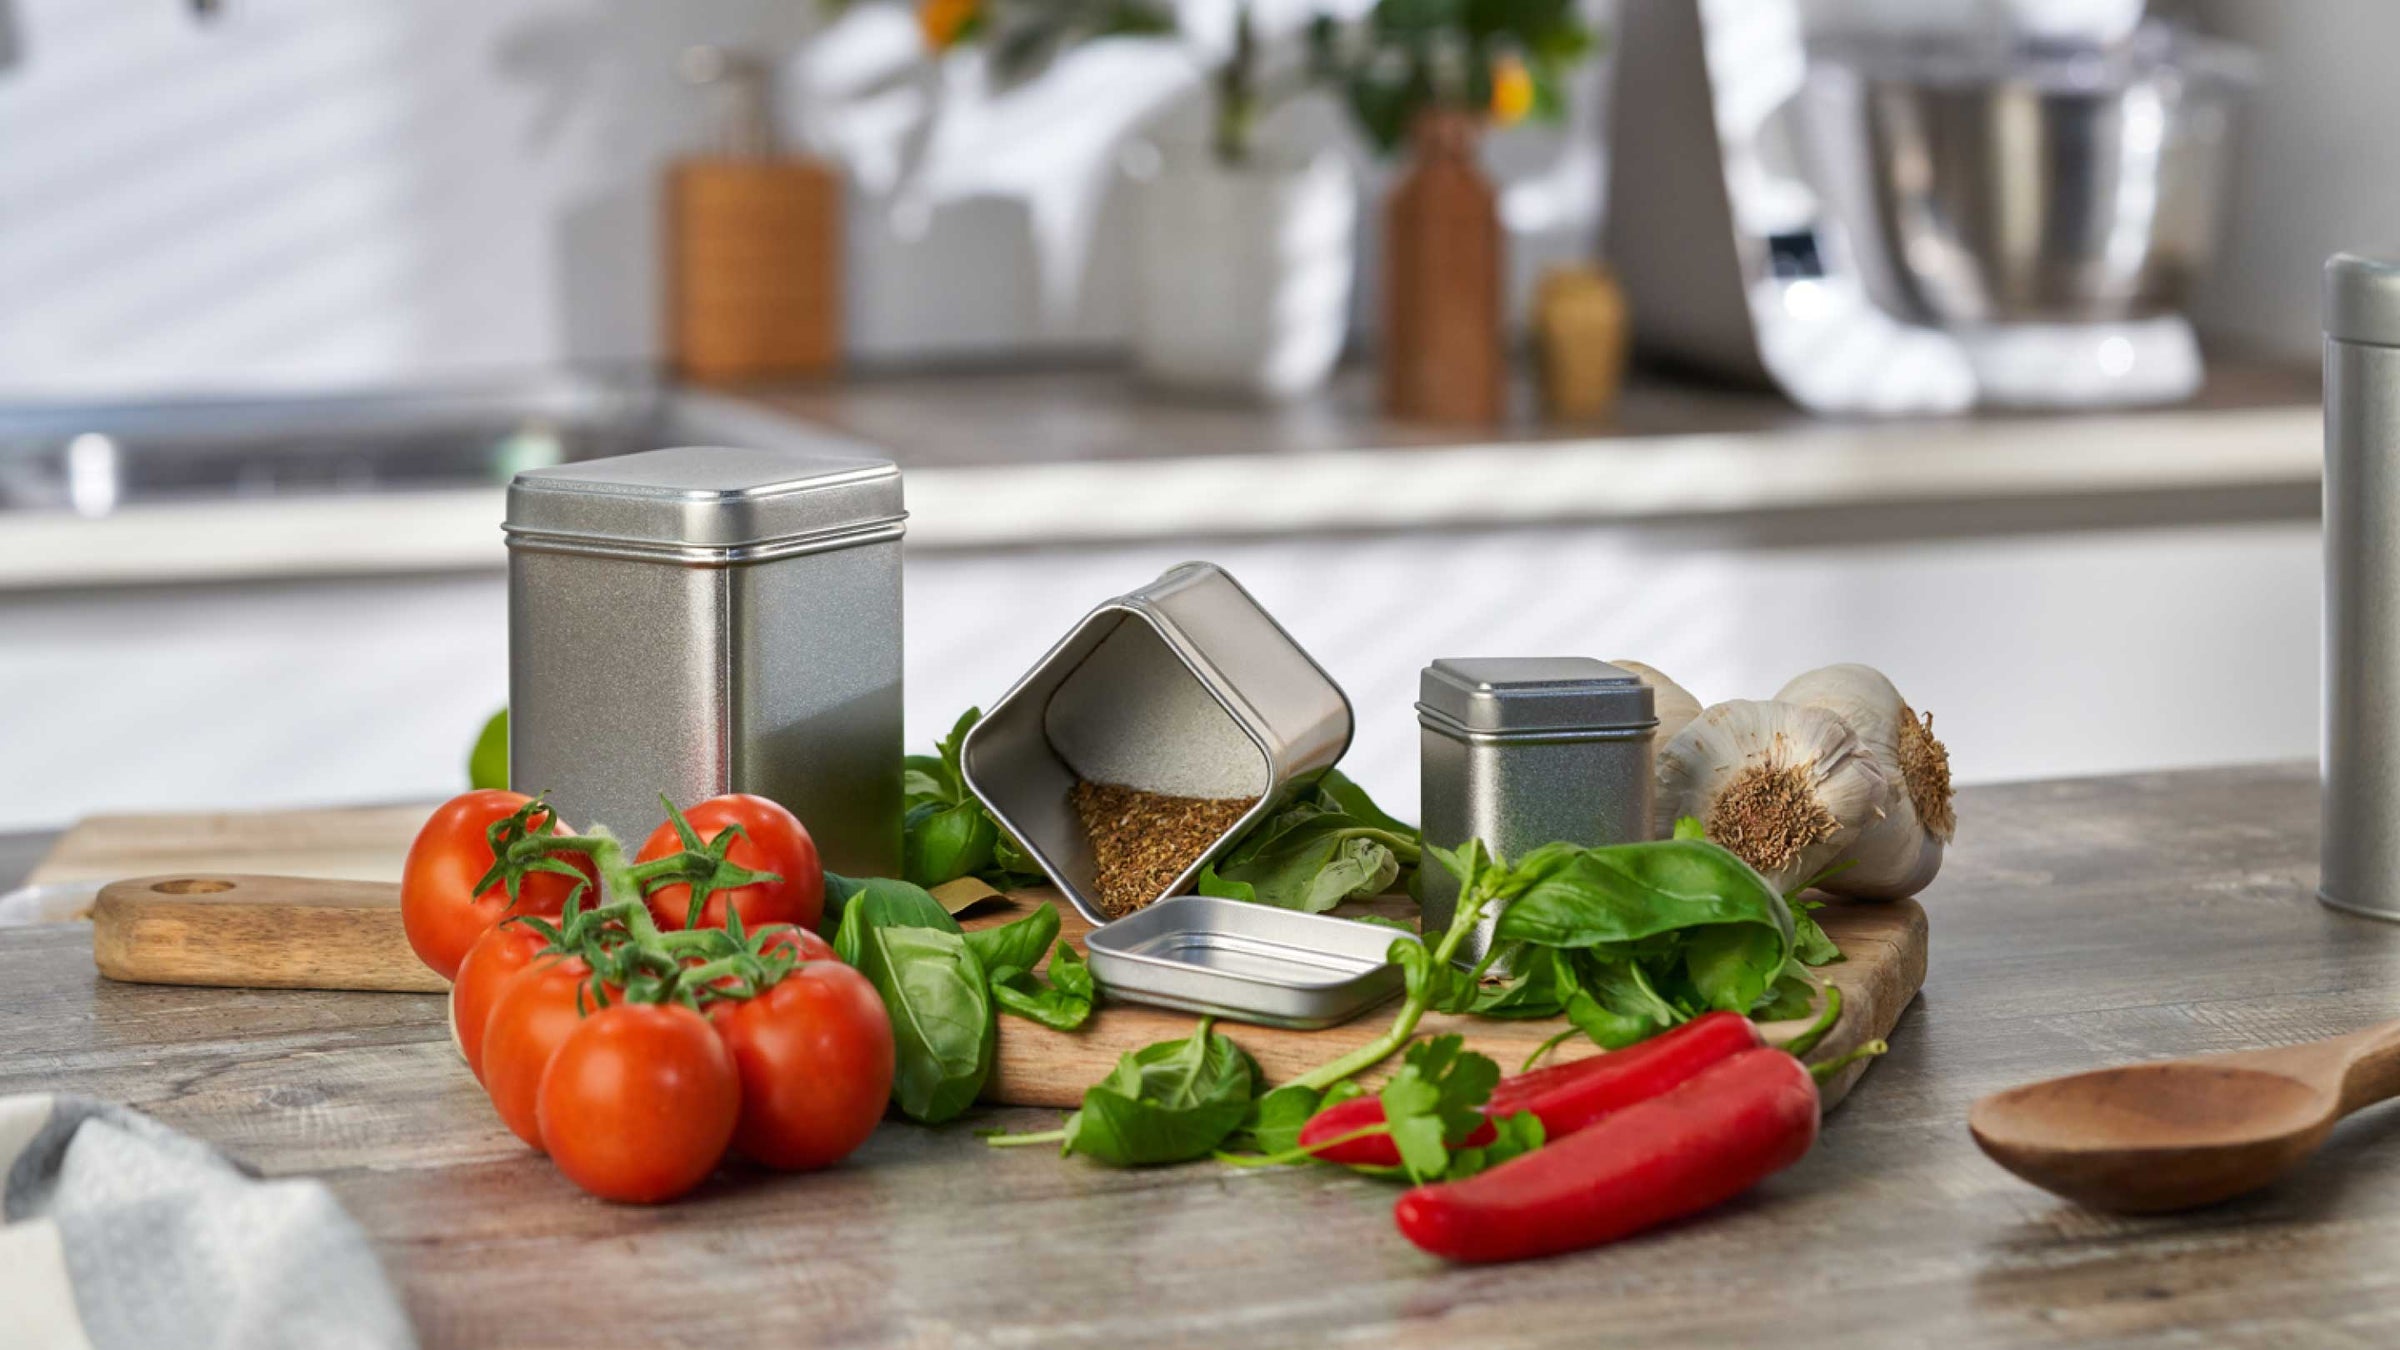 Metal tins with spices and herbs in surrounded by food.